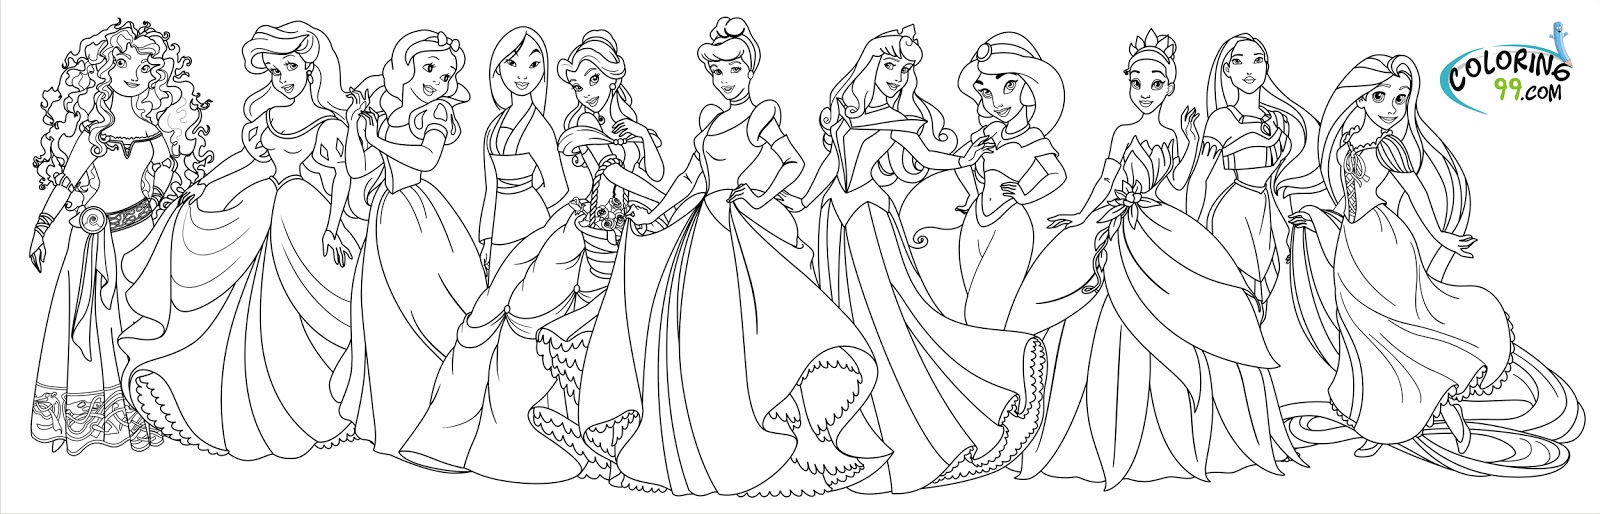 tangled coloring pages advanced - photo #48